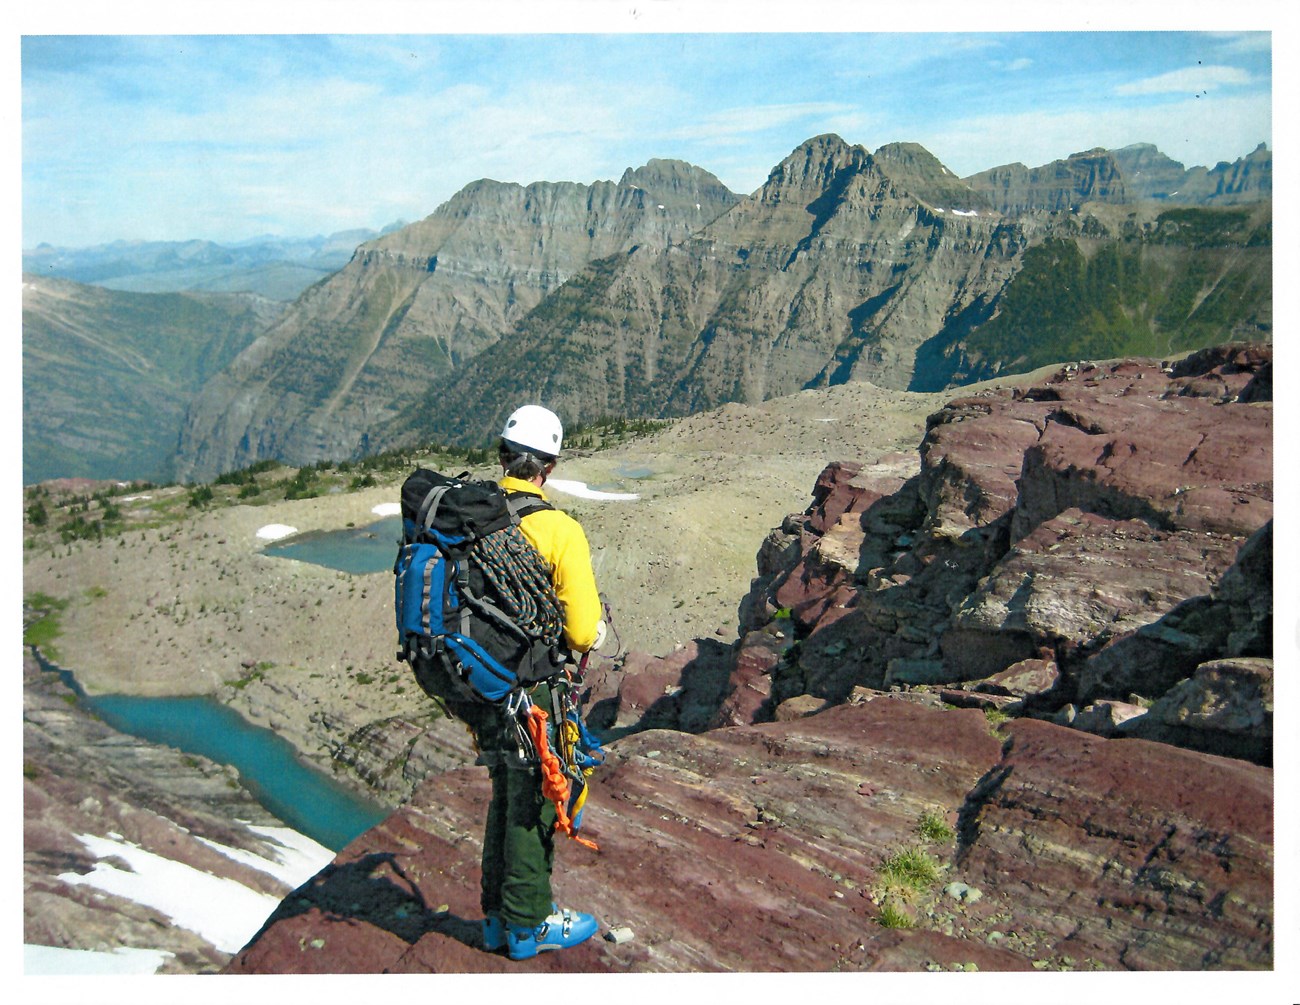 Man with backpack and ropes stands on a rock ledge.